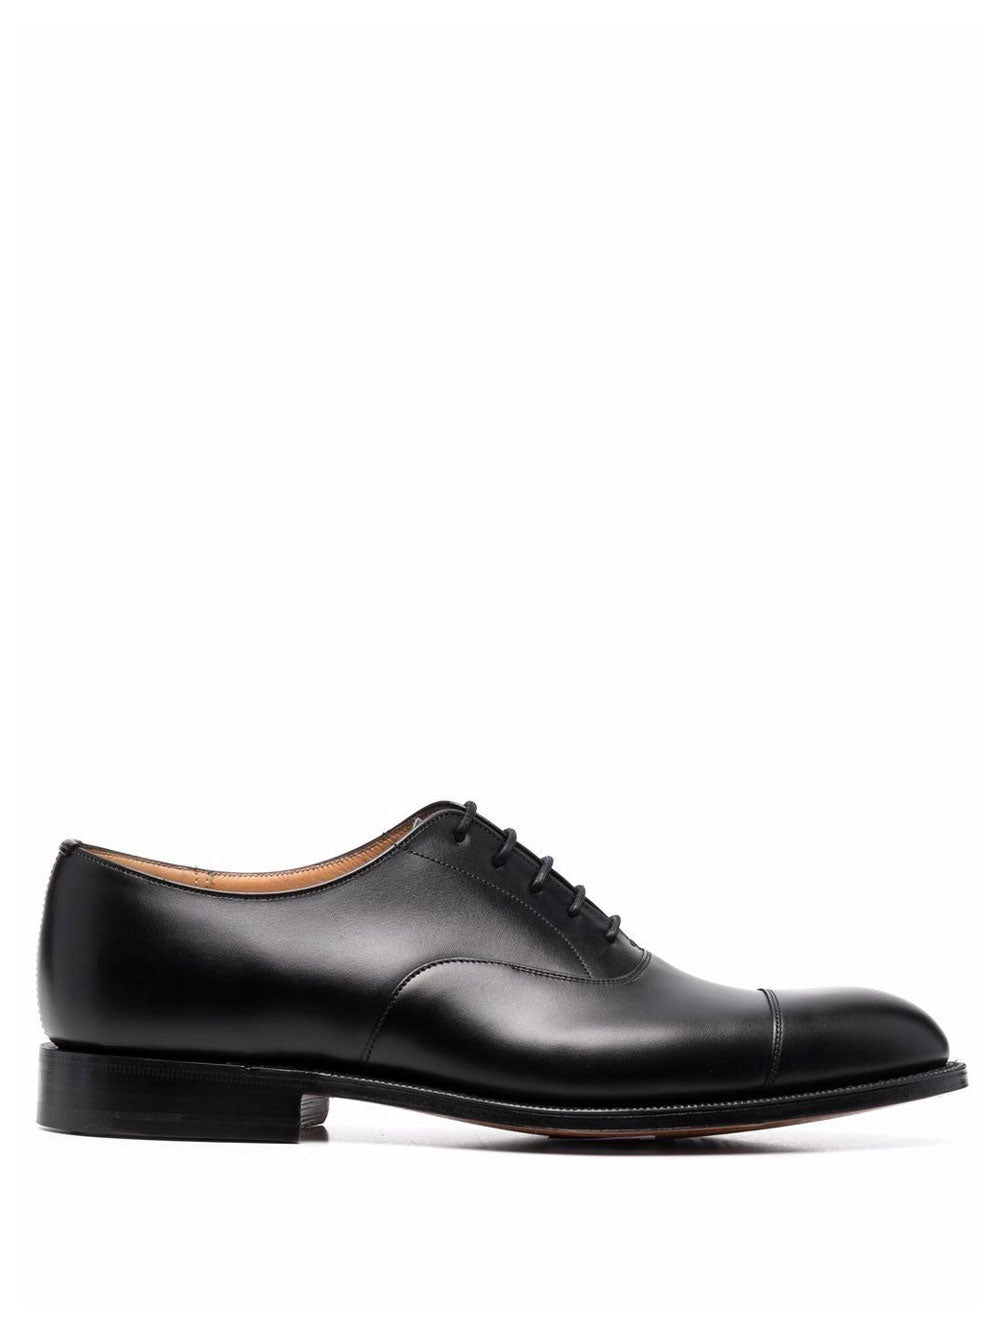 Consul 1945 leather oxford shoes